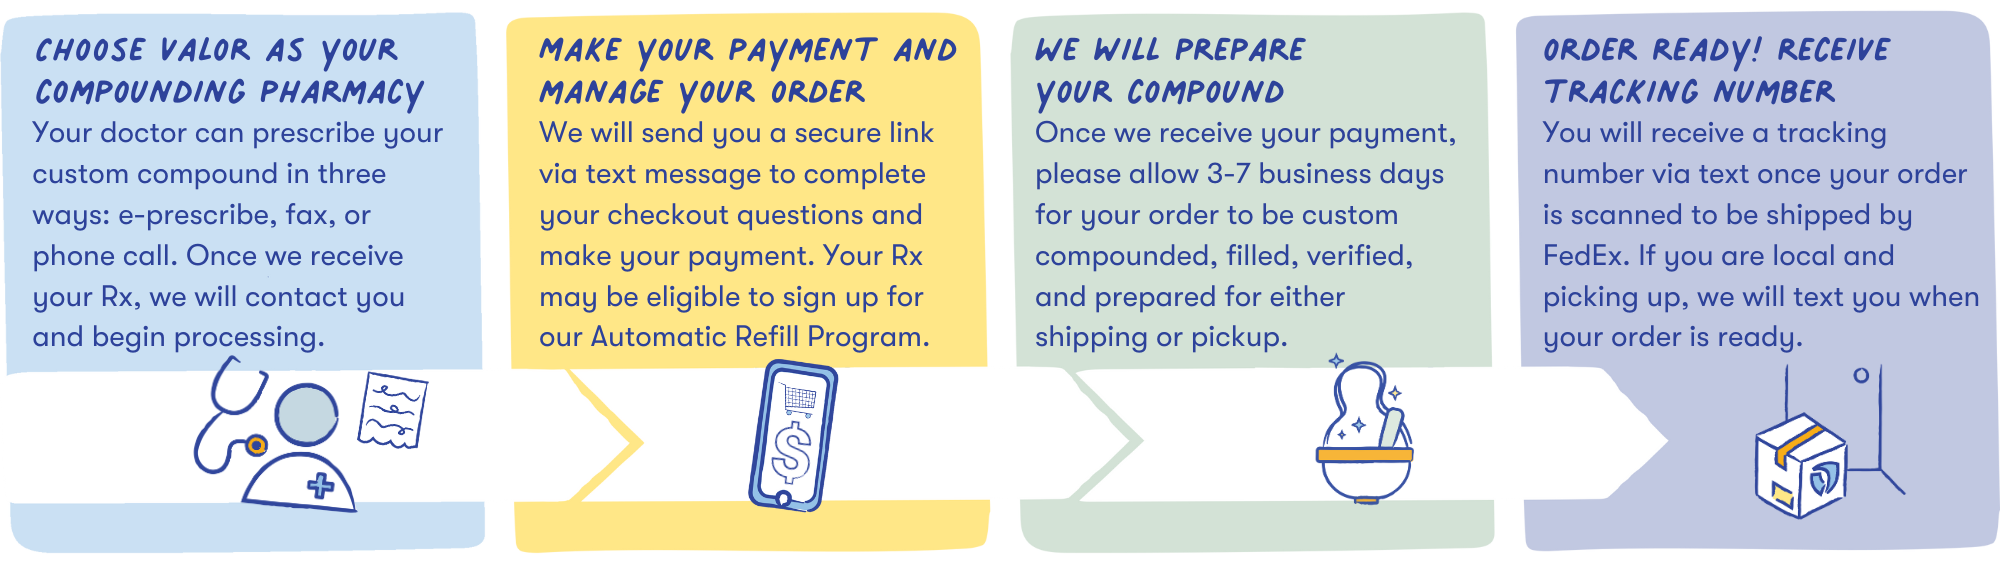 Infographic describing prescription process for Valor Compounding Pharmacy. 1: choose Valor. 2: pay and manage your order through healnow. 3: Valor will prepare your compound within 3-7 business days after payment is received. 4: Order ready, receive tracking number via email. Local in-pharmacy pickups will receive a text.